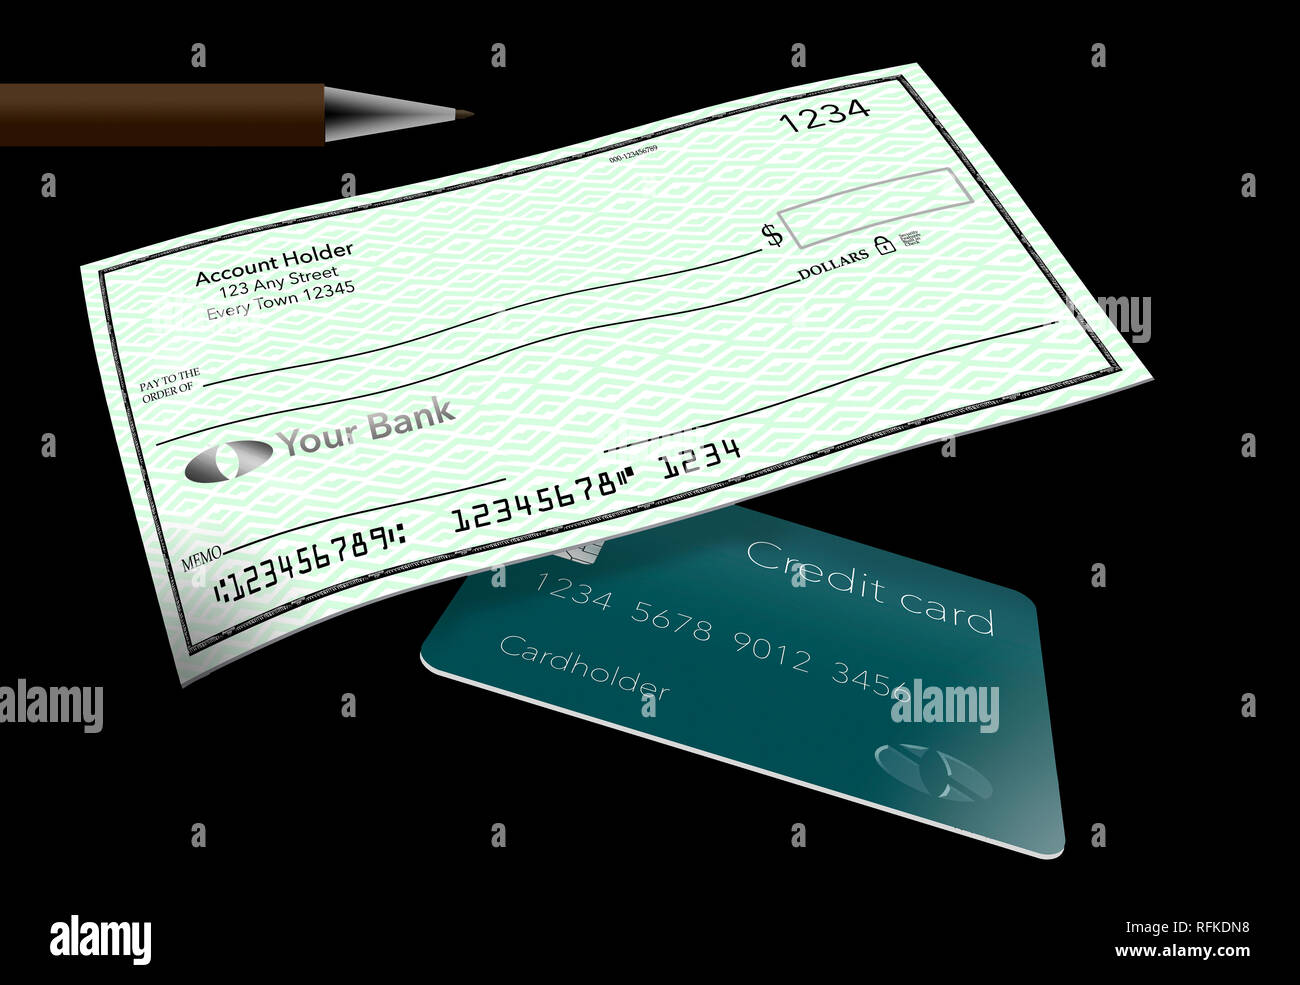 Personal Bank Checks From An Individual Checking Account Is Pictured Here This Is An Illustration Stock Photo Alamy